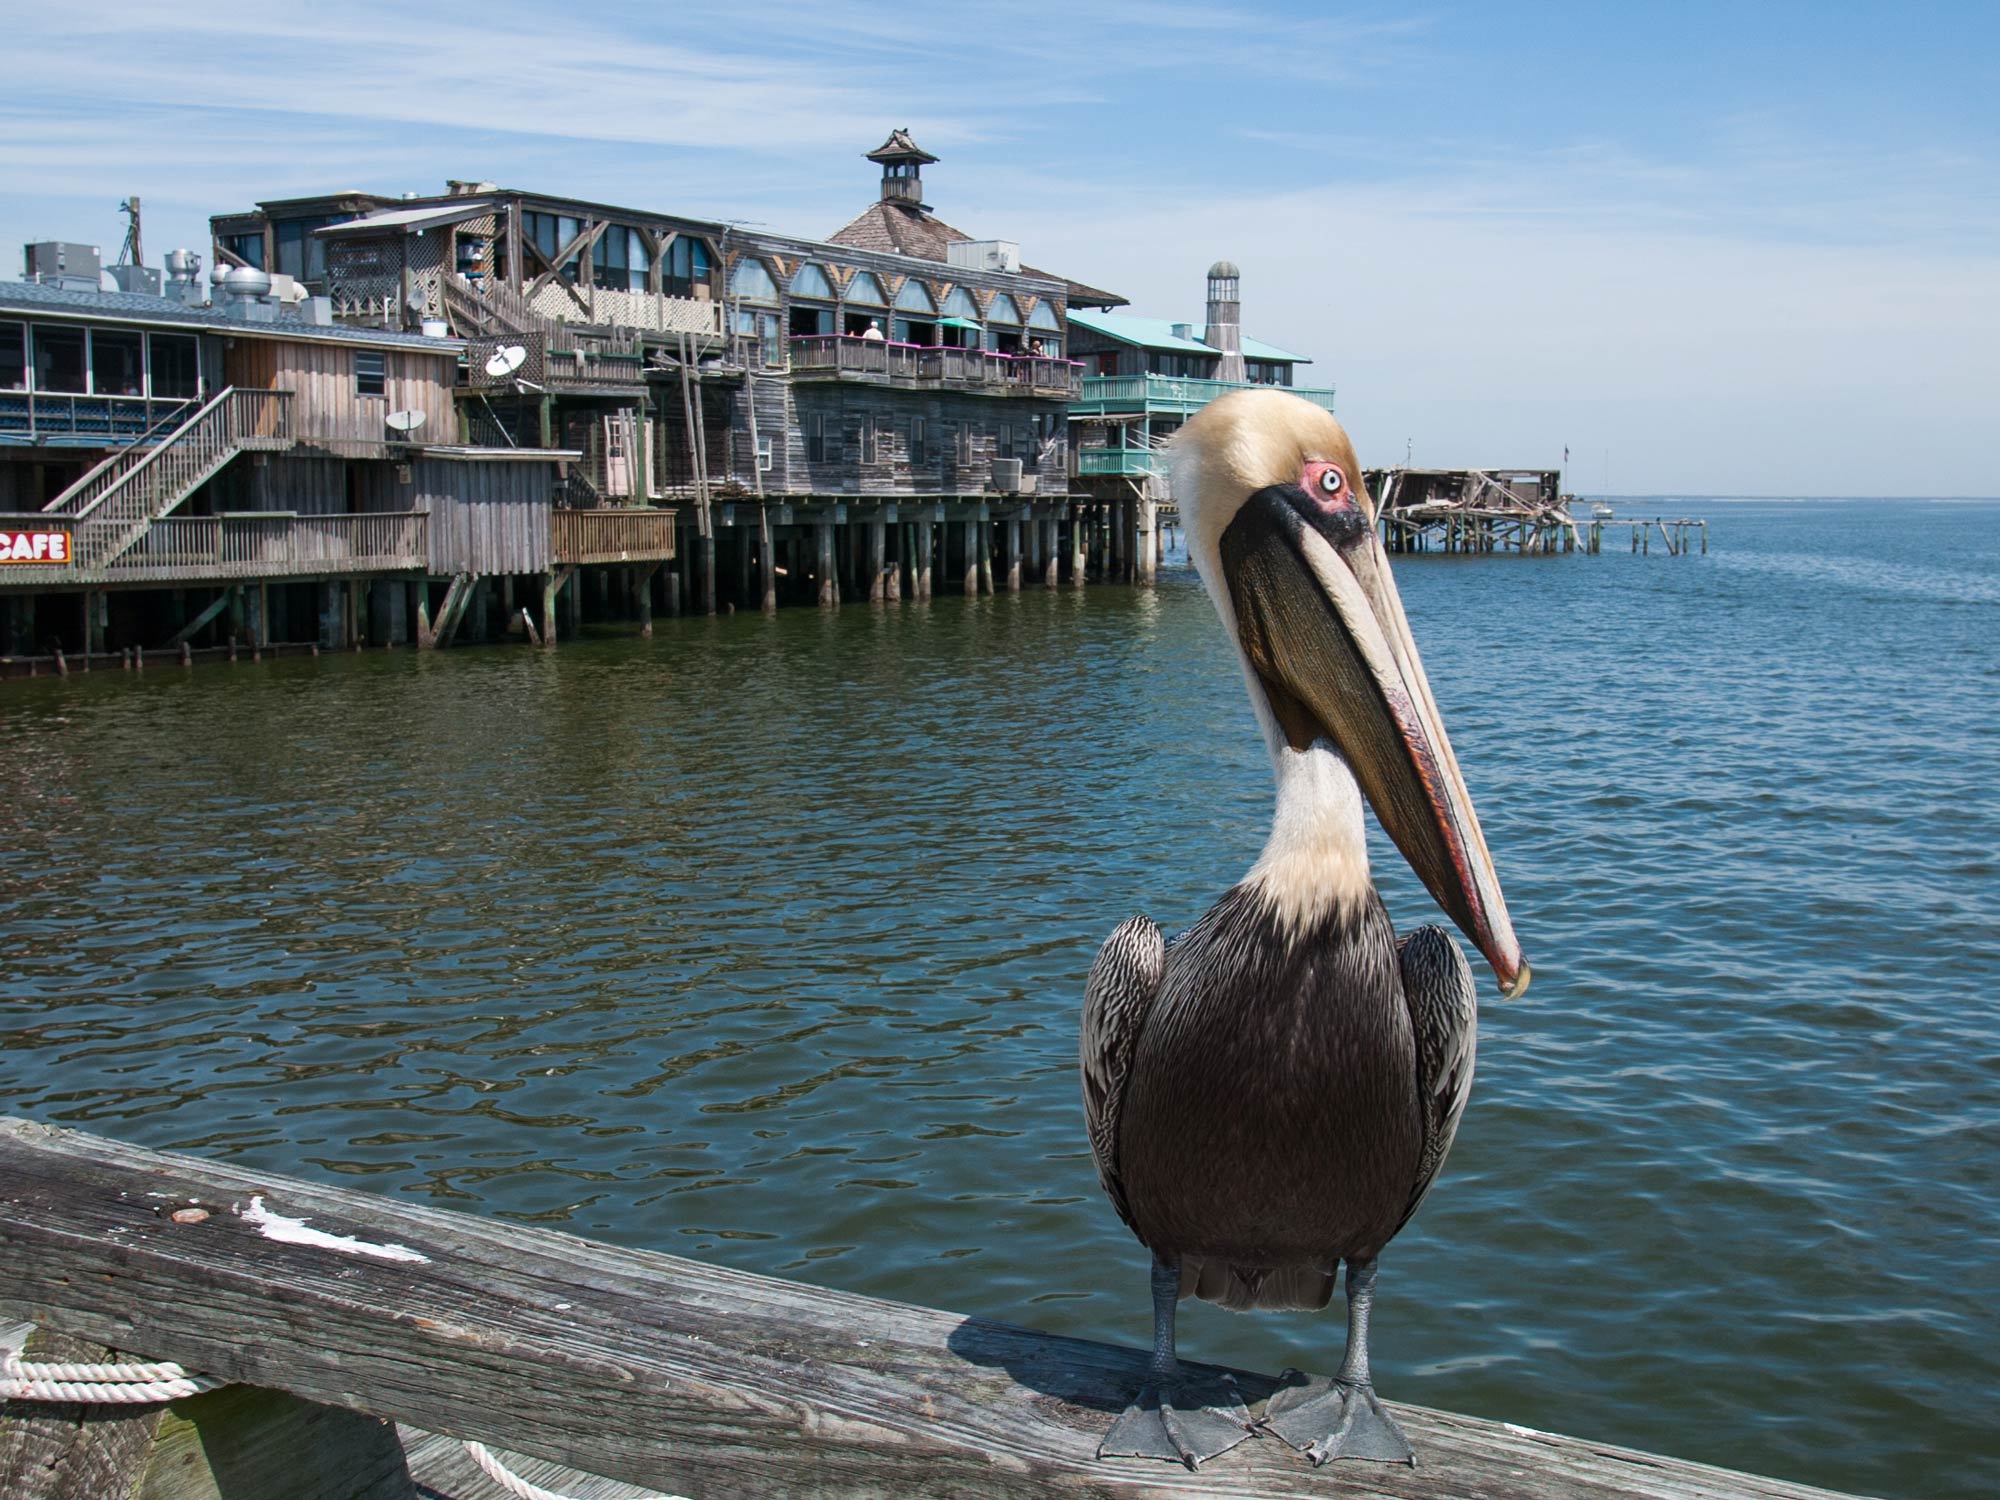 Brown pelican on a fence with the Cedar Key waterfront in the background